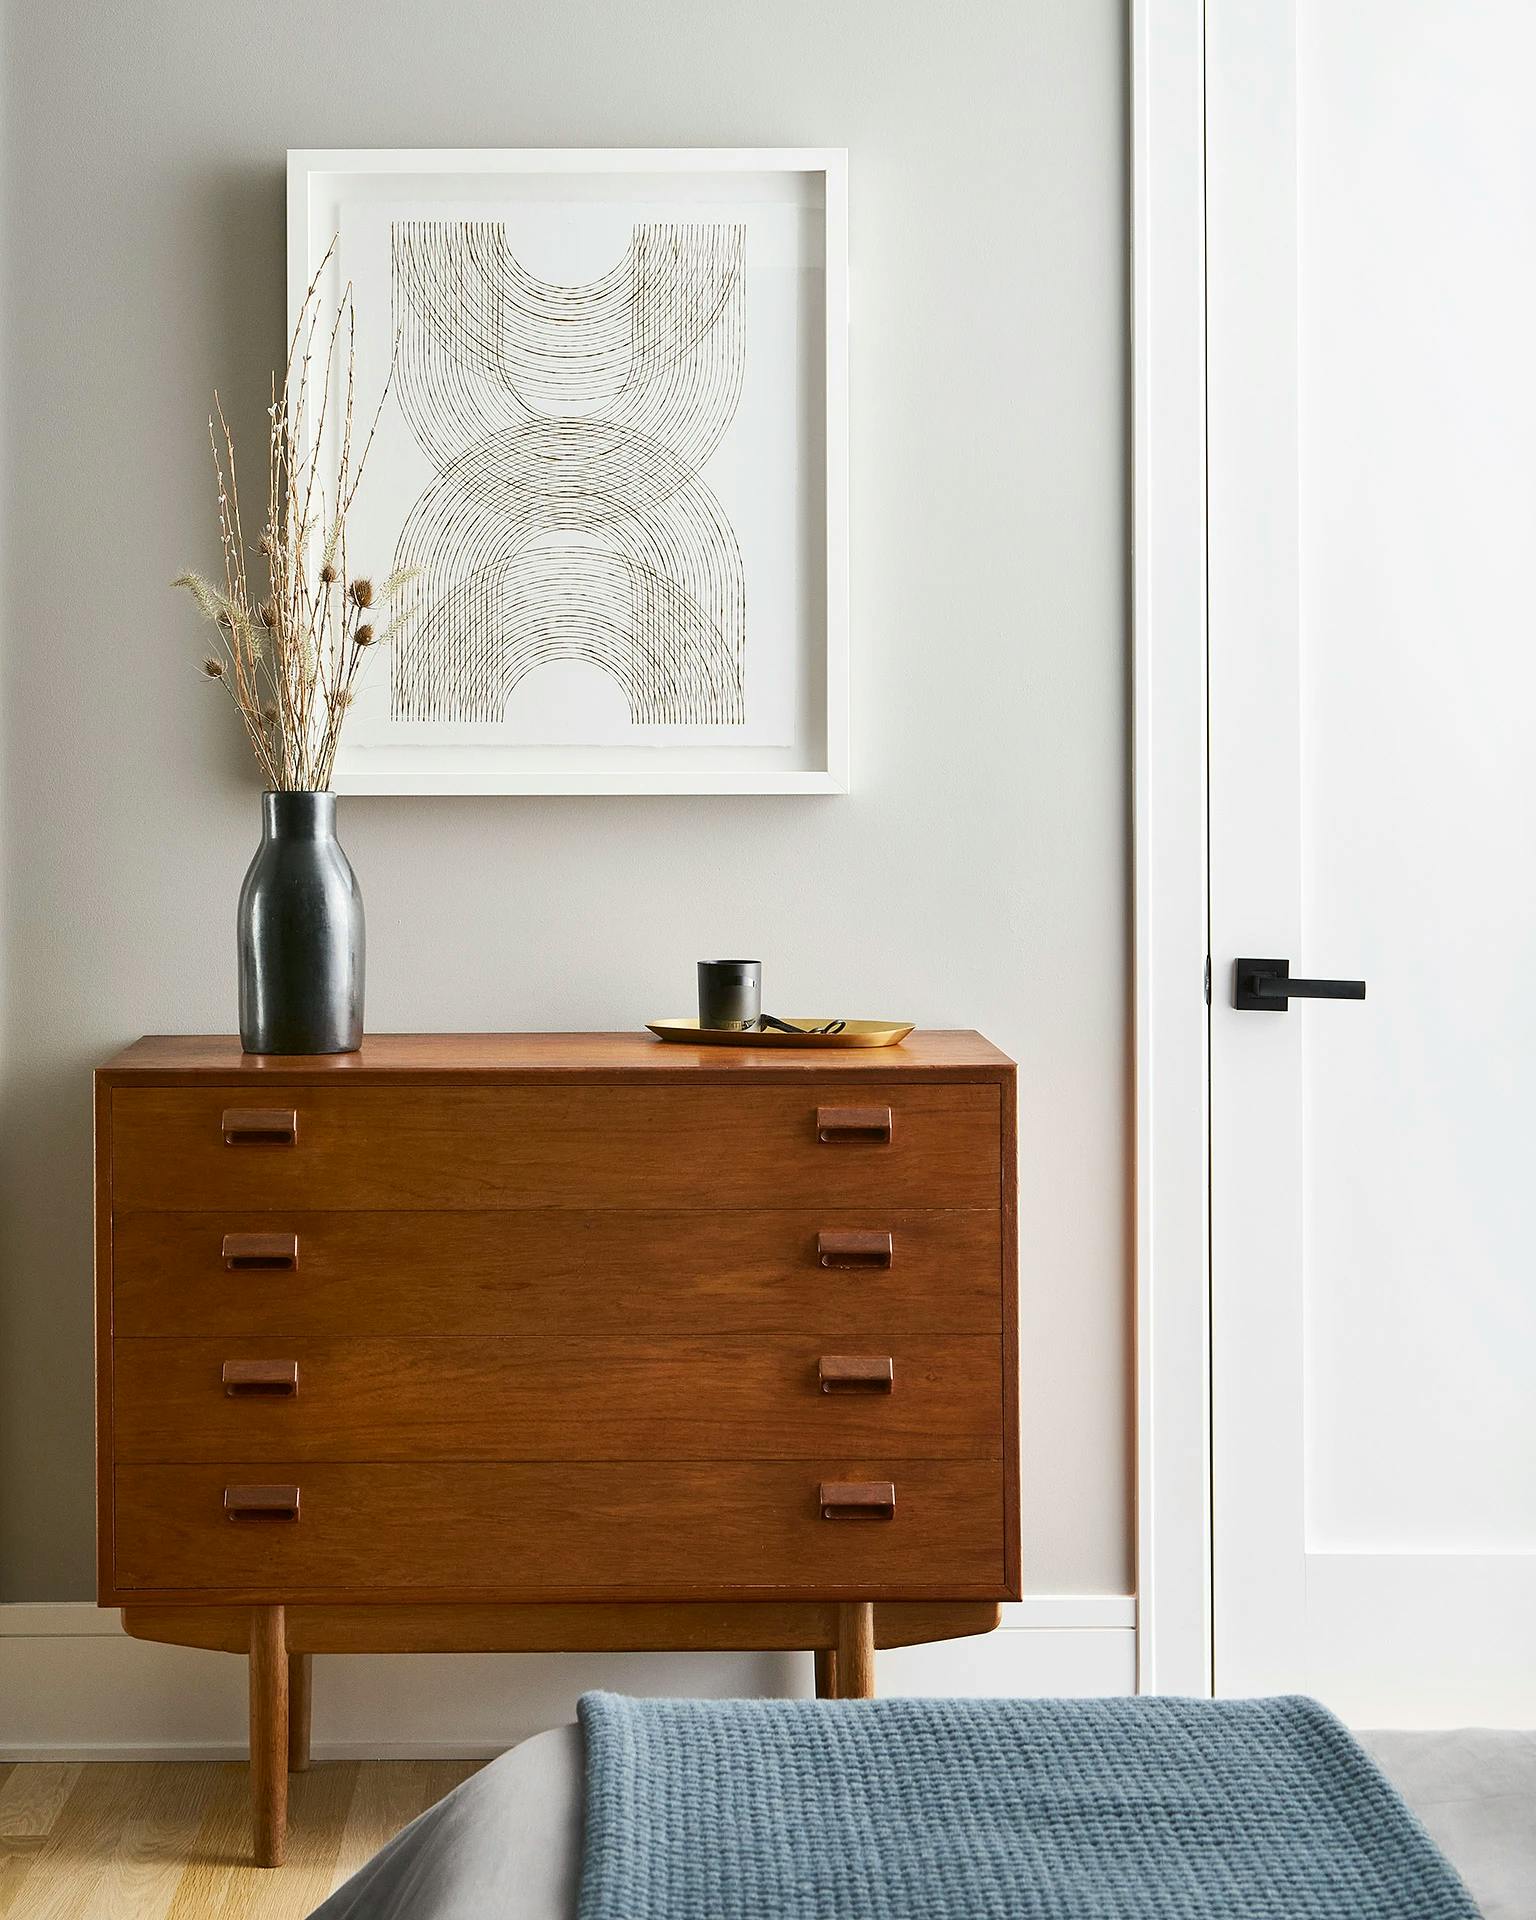 Framed geometric artwork with overlapping semicircles by artist Katrine Hildebrandt-Hussey installed on a white wall above a wooden dresser in a bedroom.